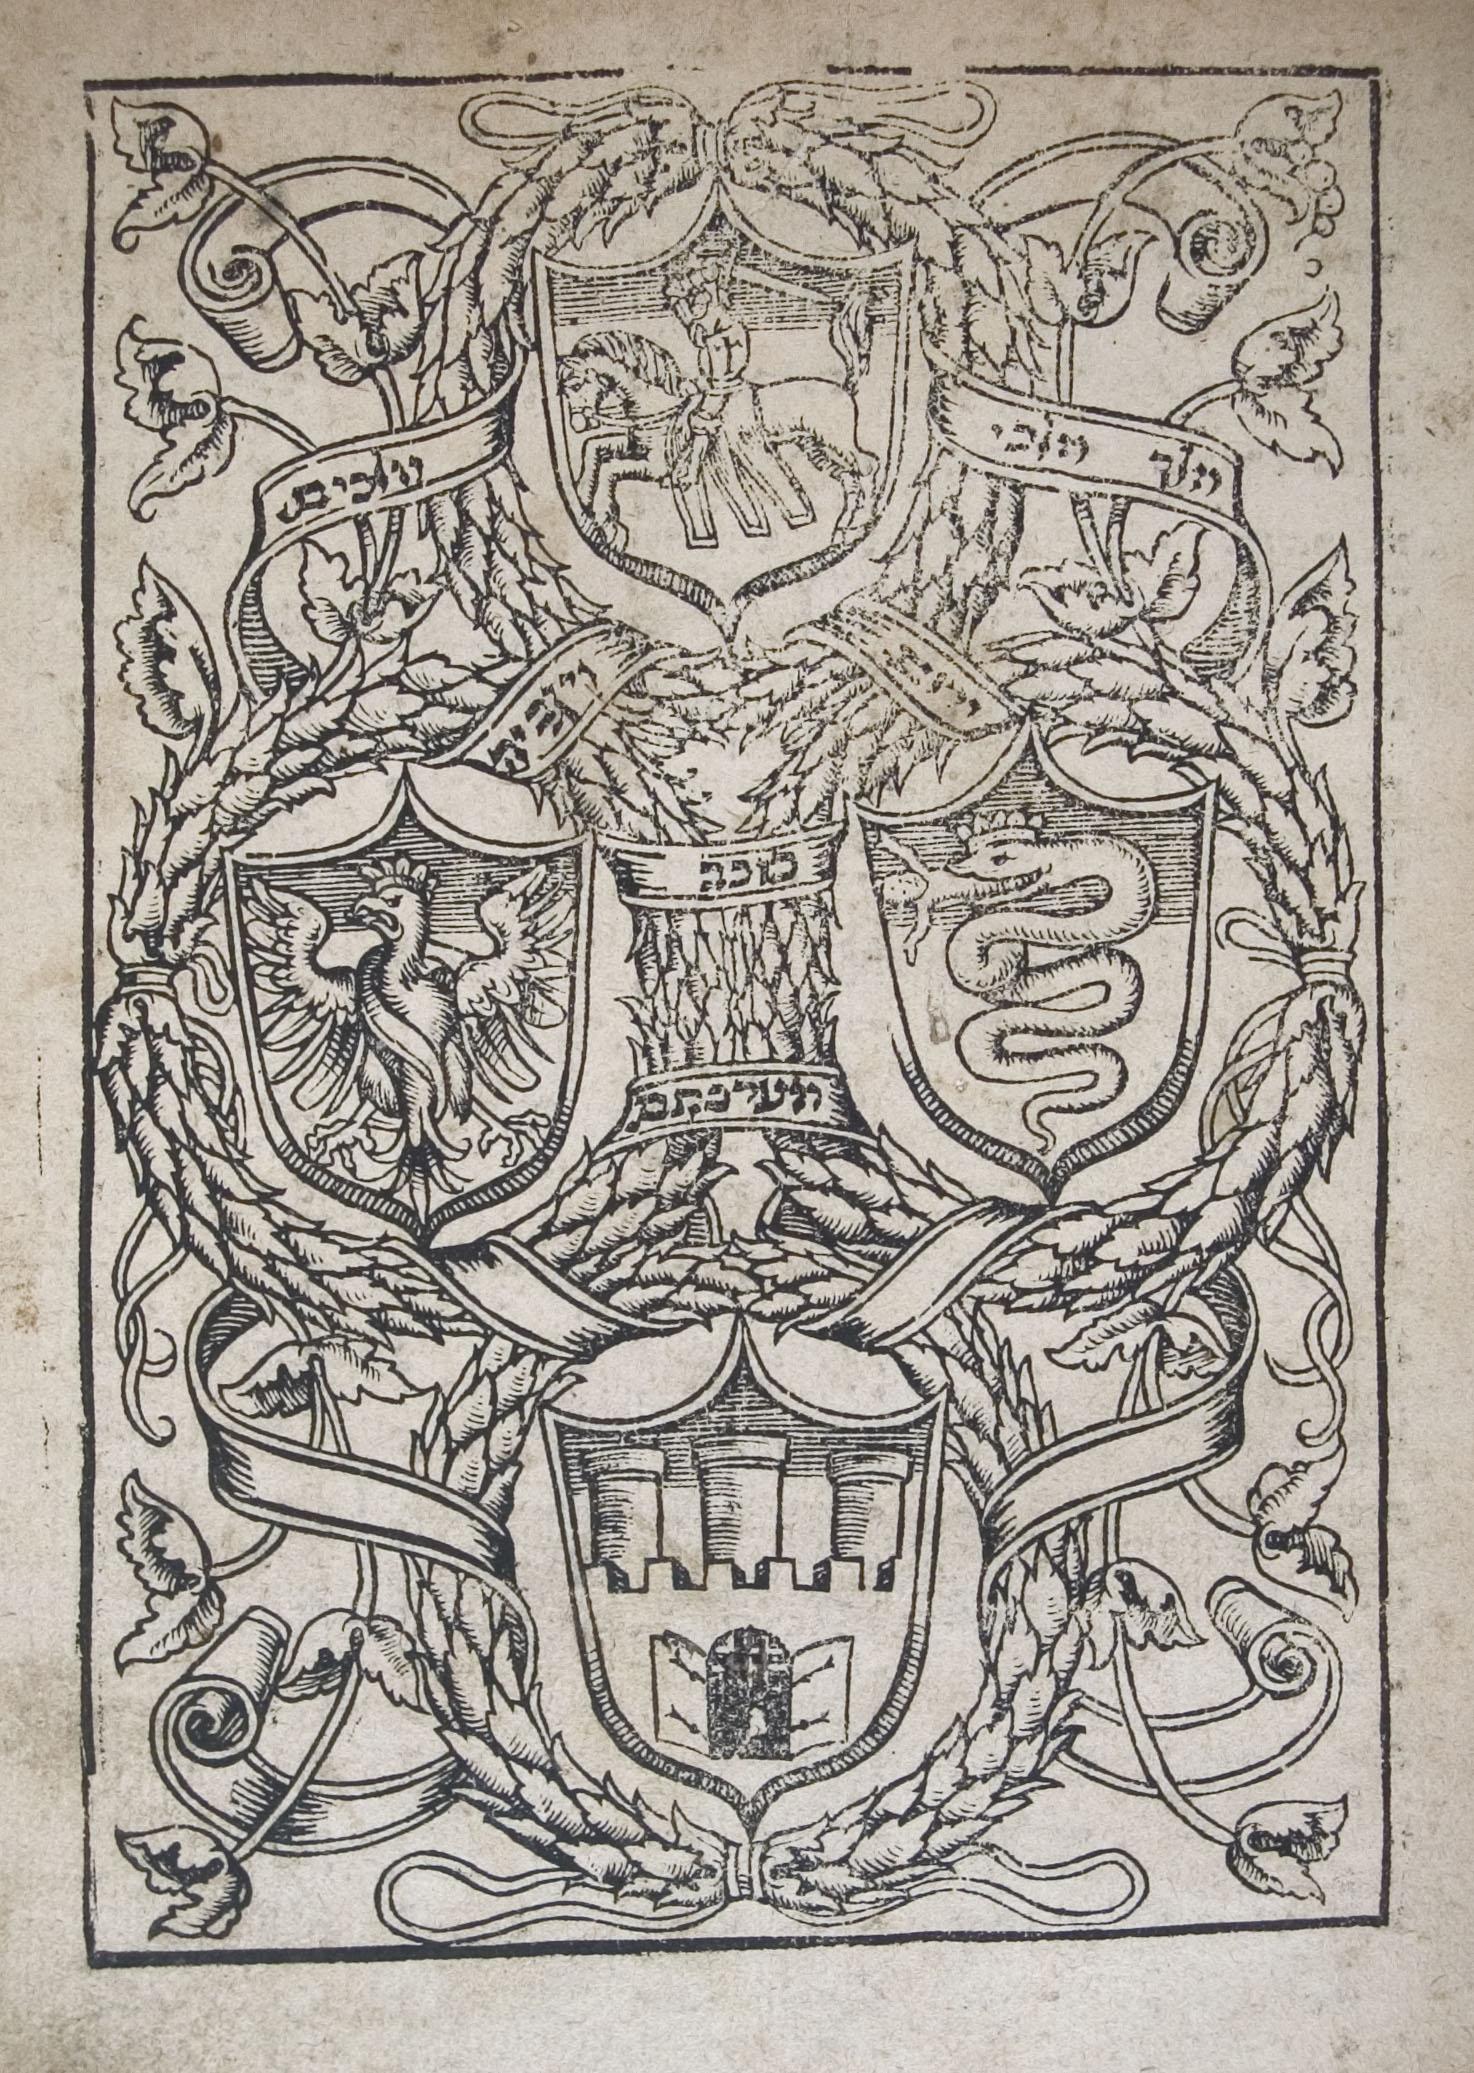 Printed page of four shields depicting a castle, an eagle, a snake devouring a person, and a knight on horseback, surrounded by Hebrew words, sheaves, ribbons, and flowers. 